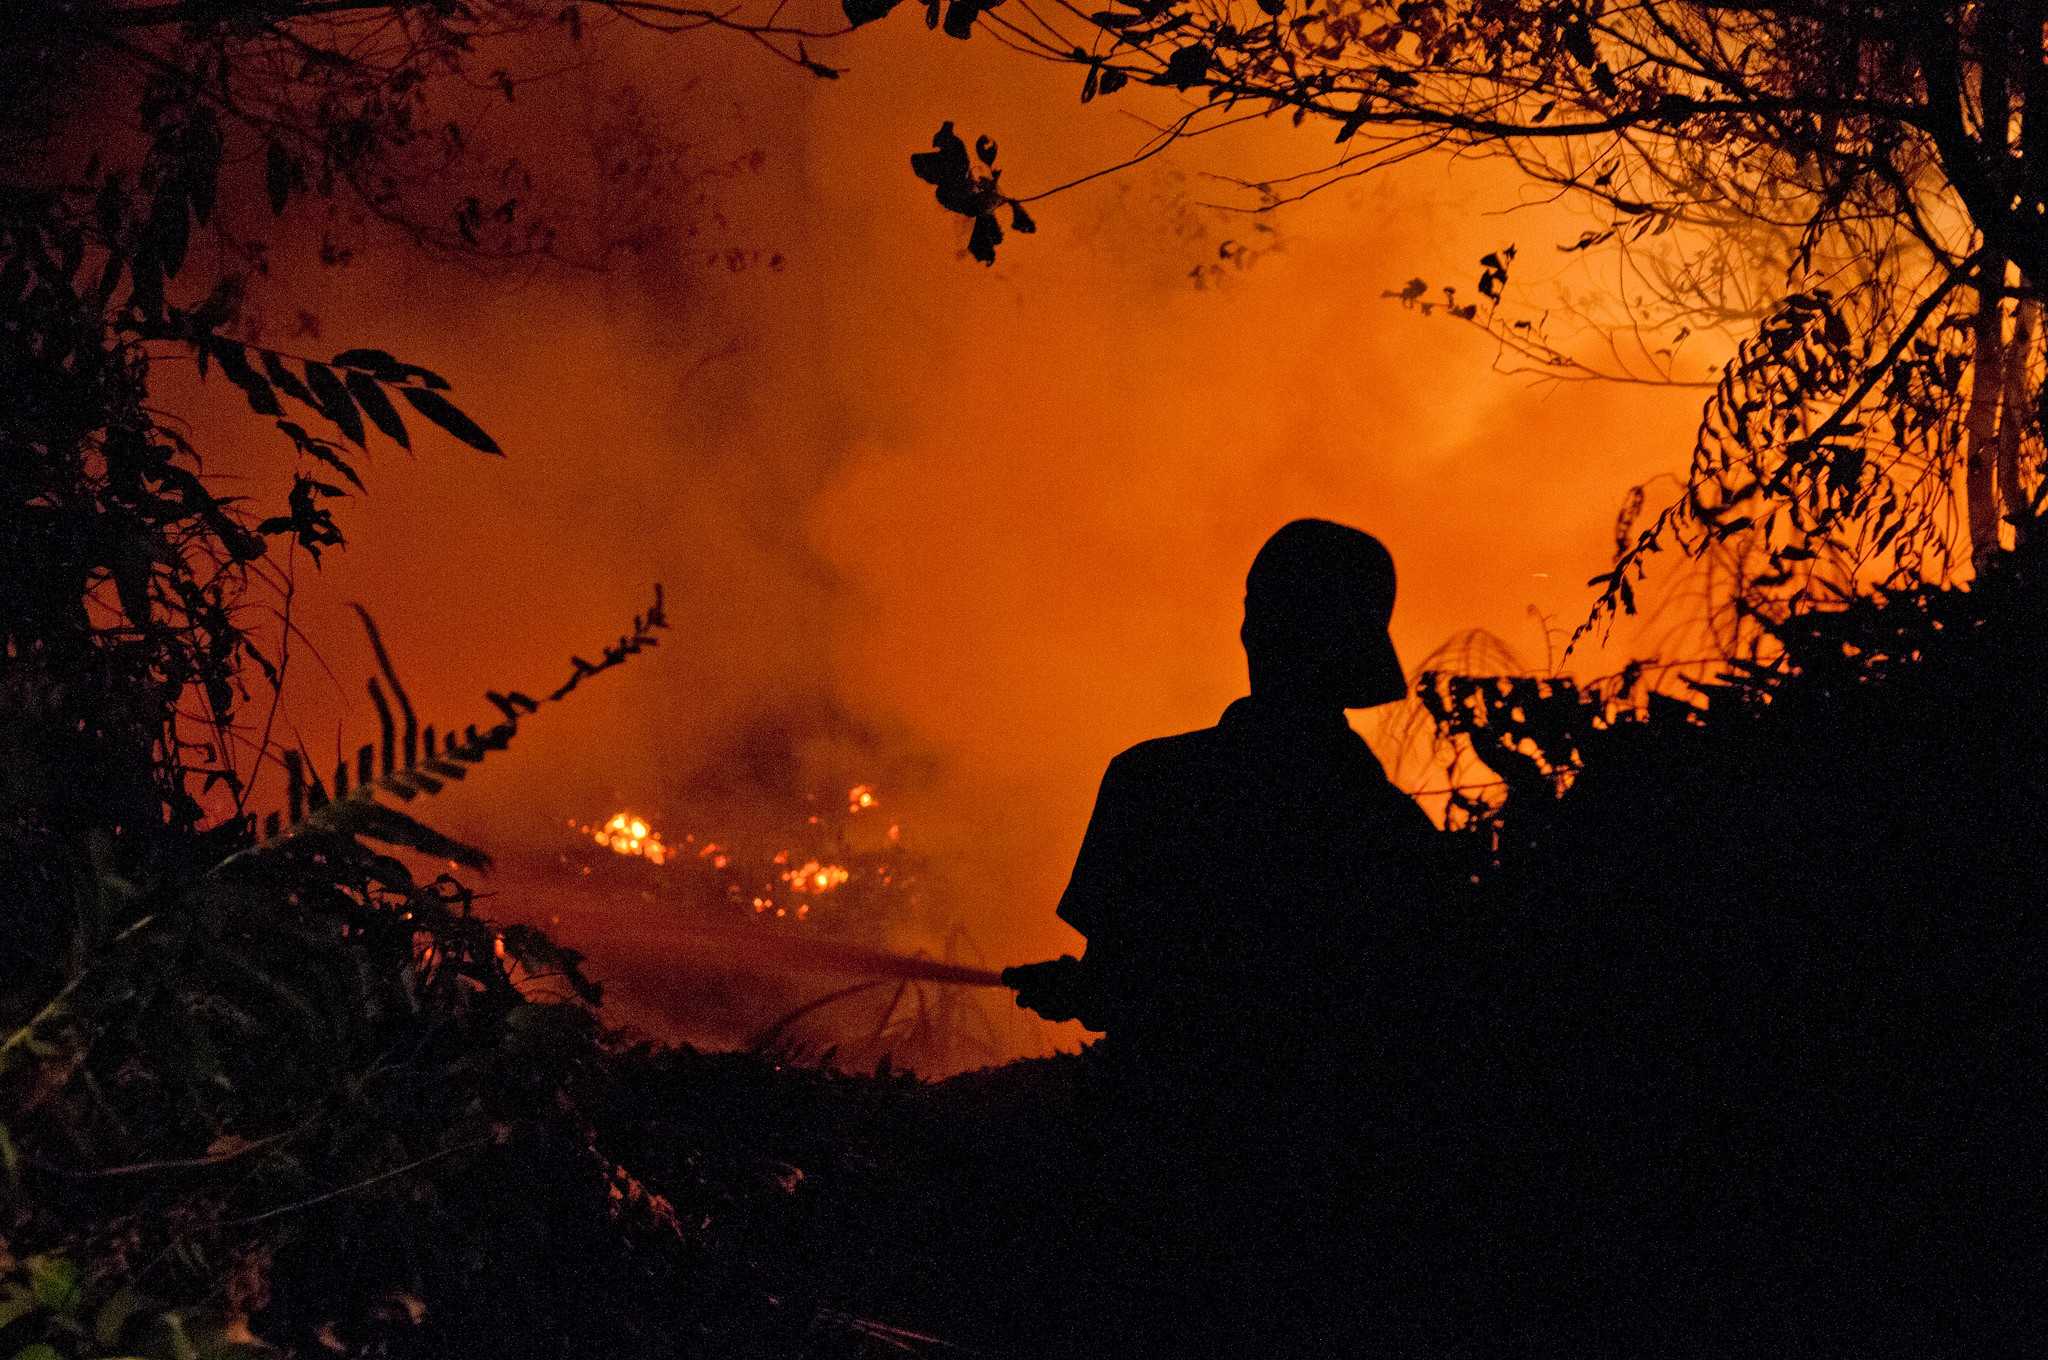 Firefighters try to extinguish fires at night in peatland areas outside the city of Palangka Raya in Central Kalimantan province. 